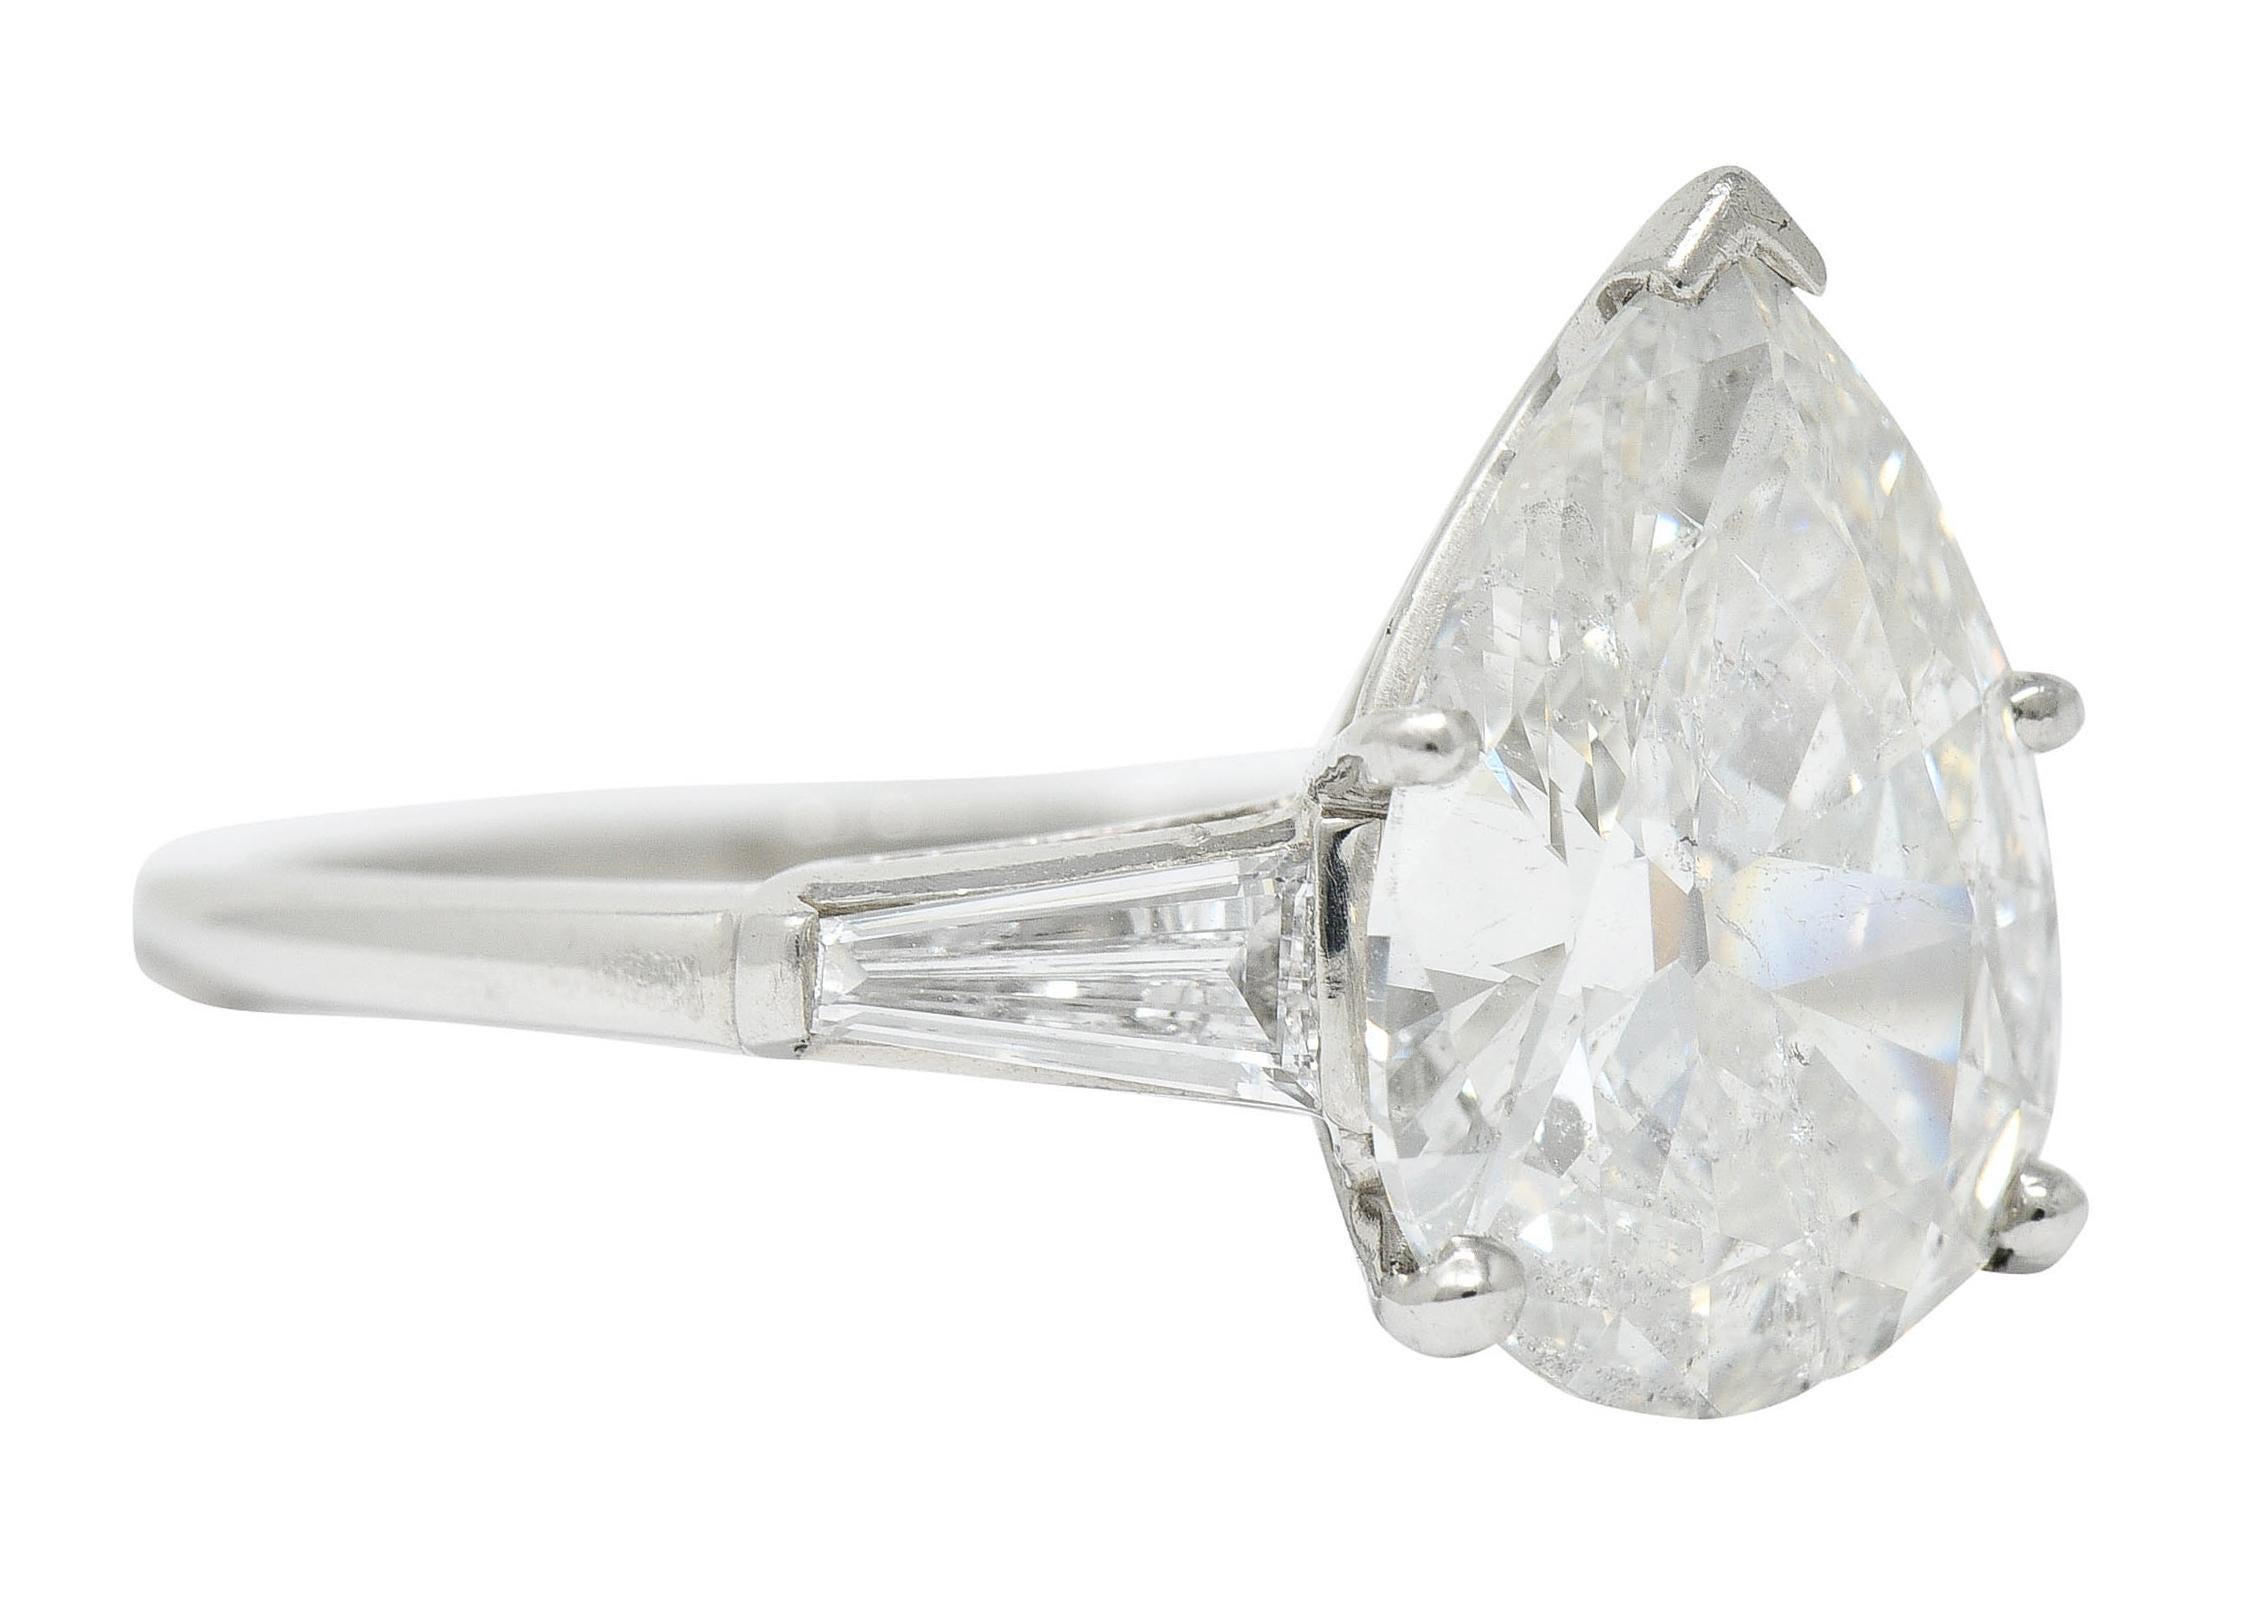 Cathedral basket ring centers a pear shaped brilliant cut diamond weighing 3.89 carats - I color with I2 clarity

Flanked by two tapered baguette cut diamonds weighing in total 
approximately 0.50 carat - H/I color with VS clarity

With maker's mark